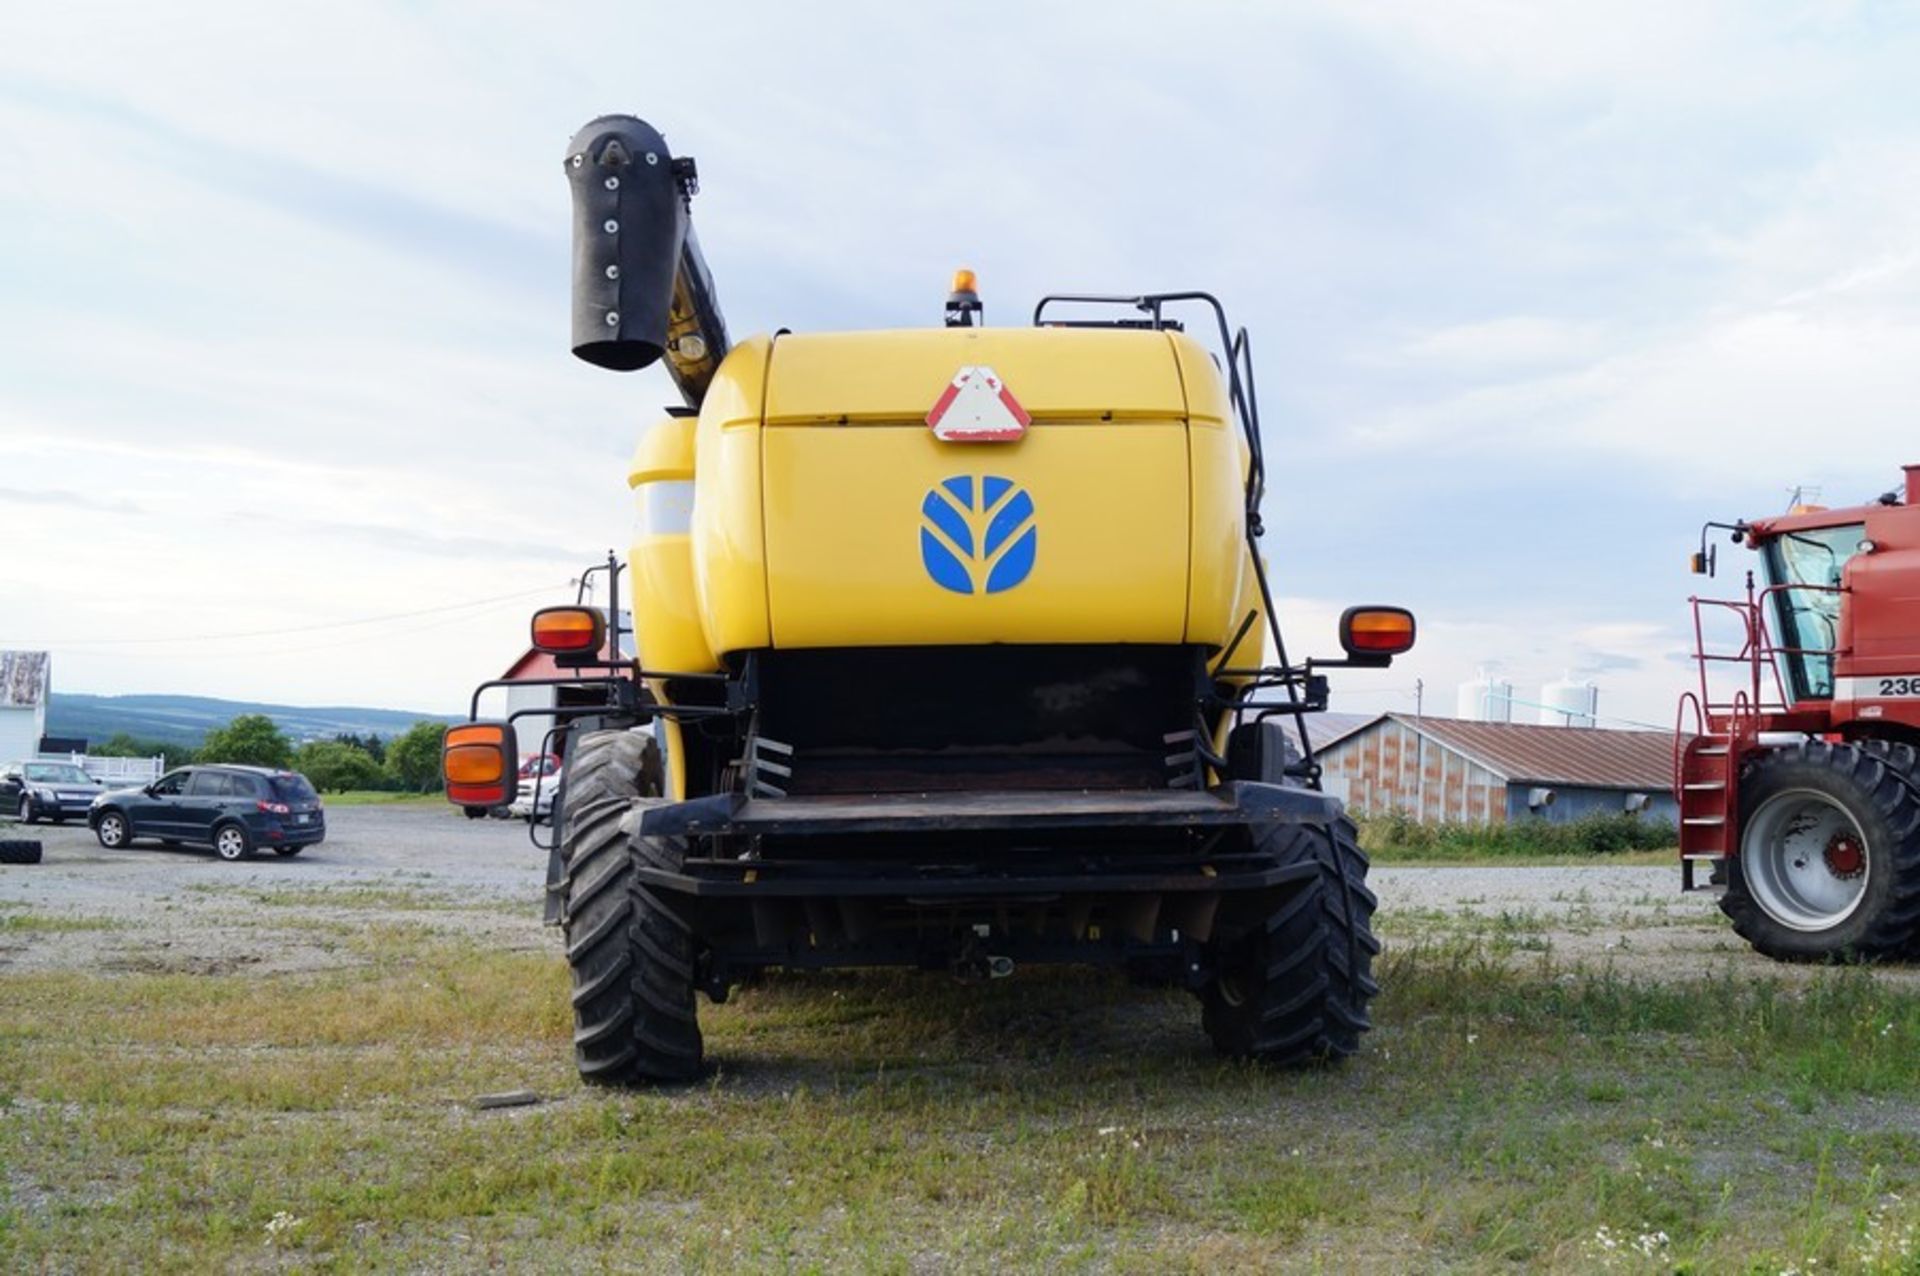 2008 NEW HOLLAND CX8080 Combine Harvester, 4700 Sep.hrs - Image 9 of 24